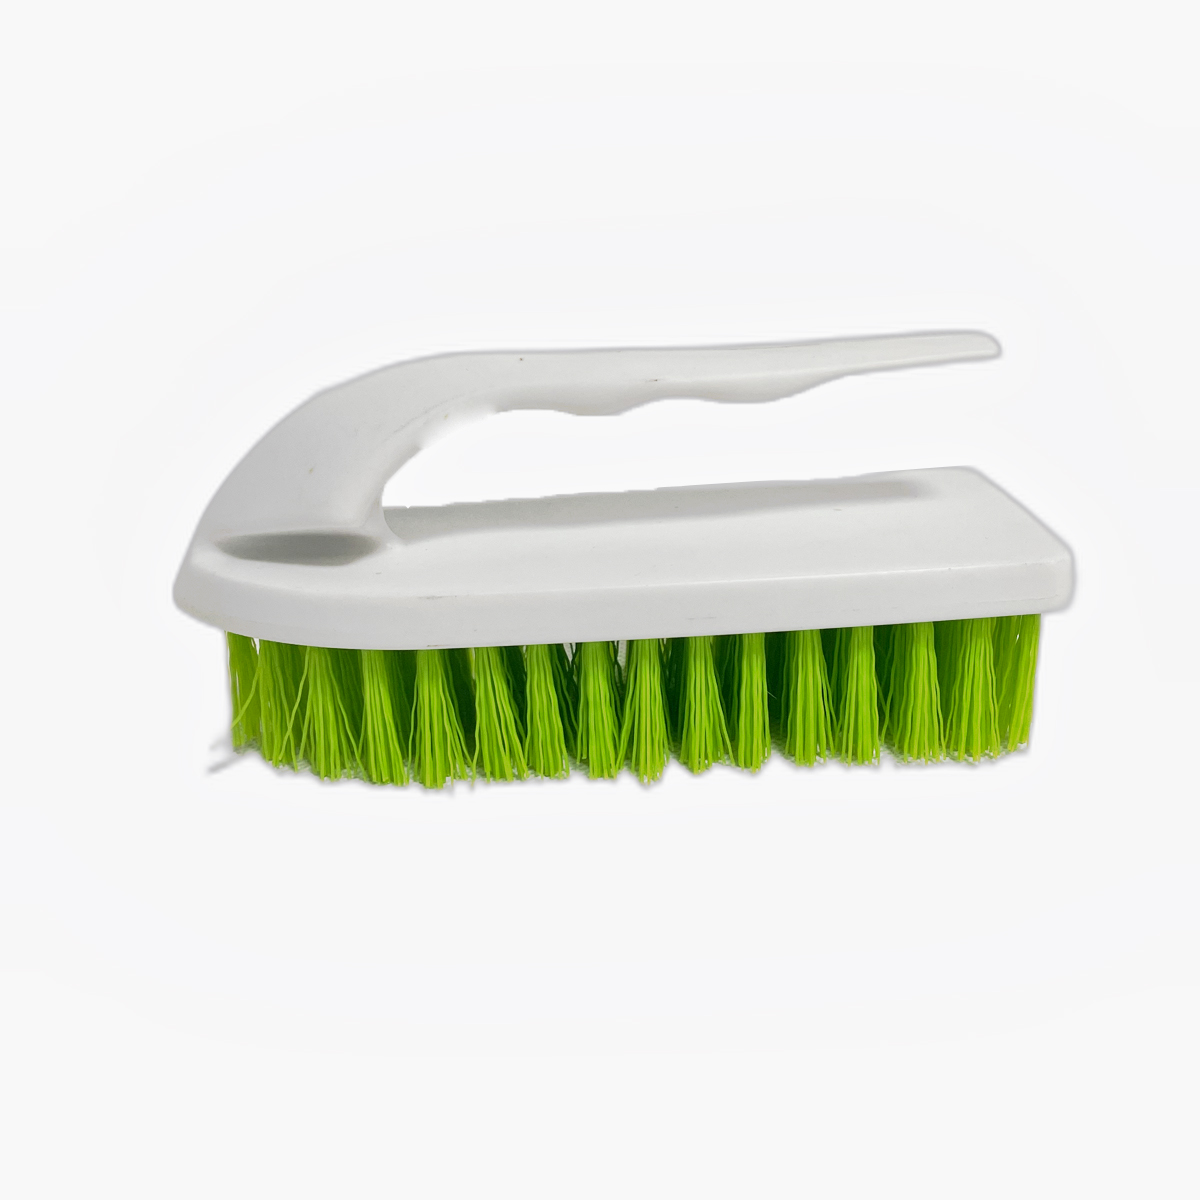 Shape Household Plastic Clothes Washing Cleaning Scrub Wash Brush With Handle